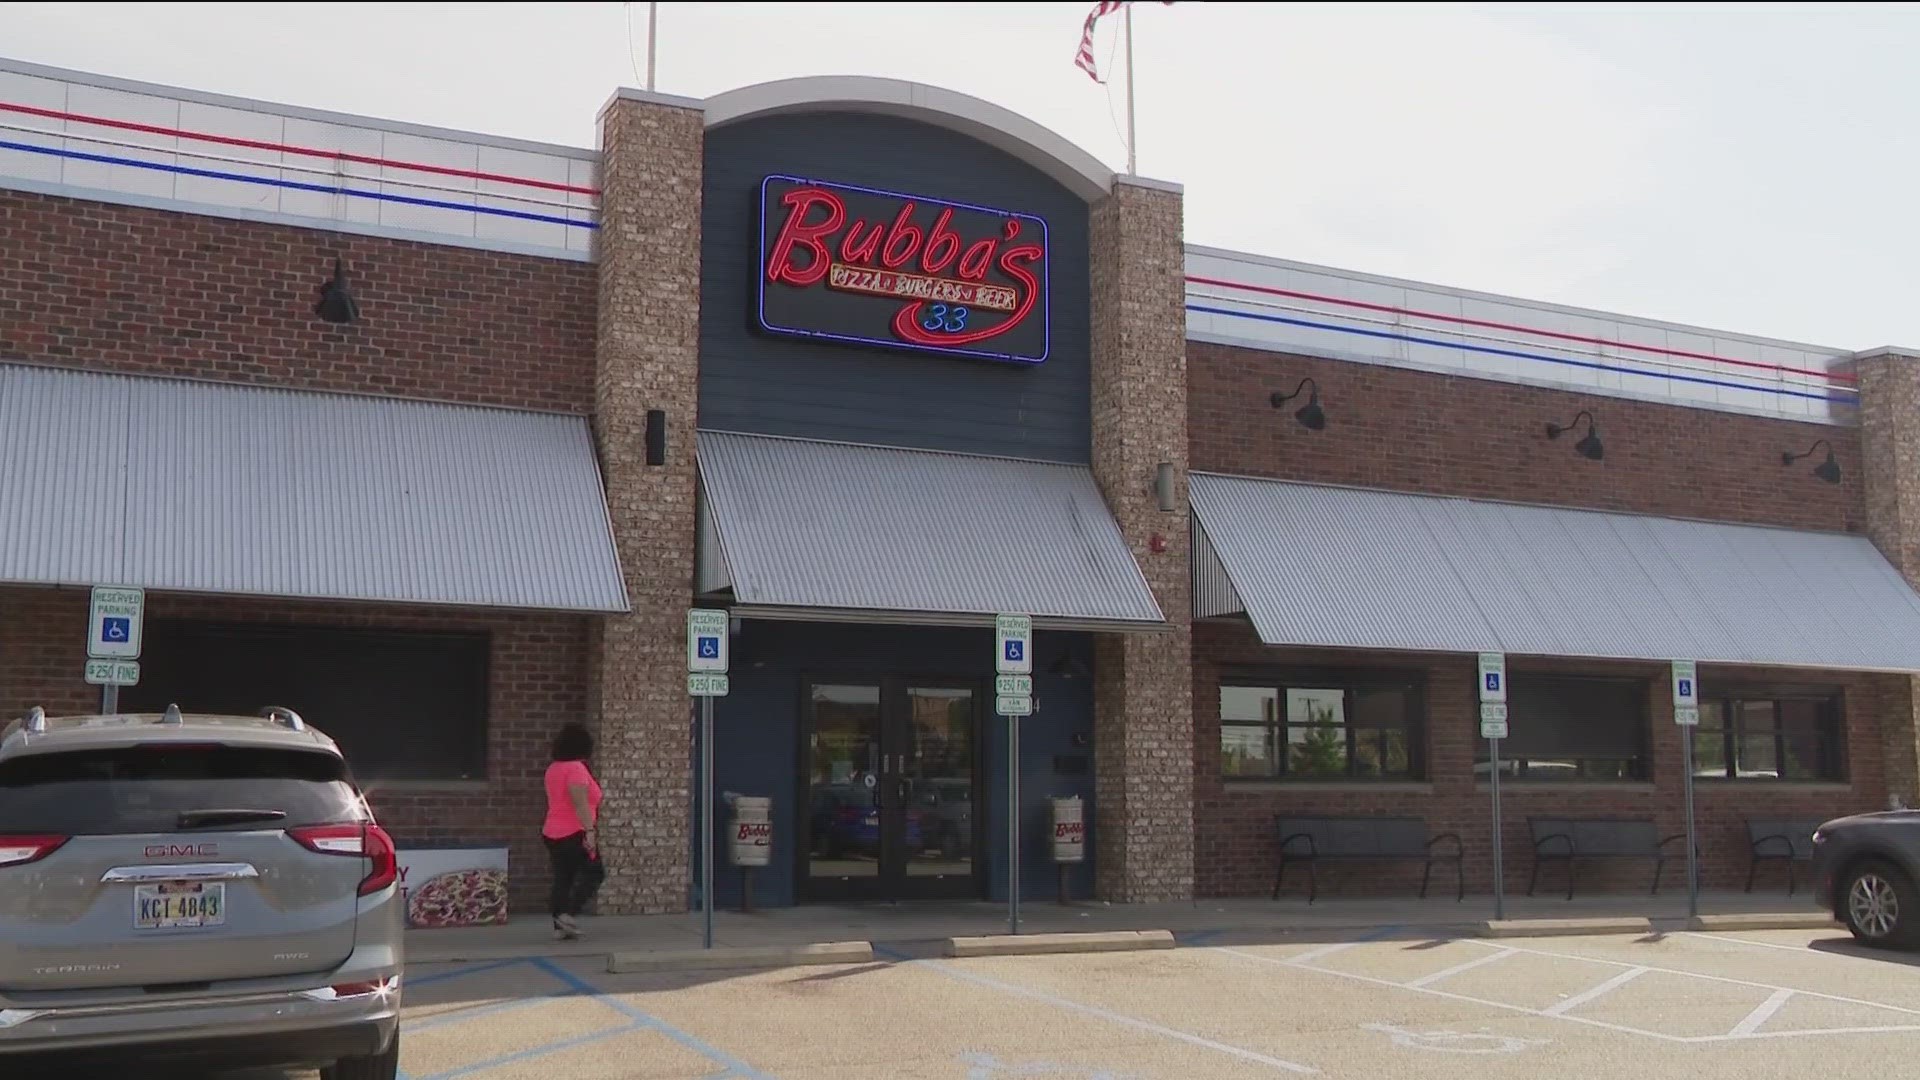 Bubba's 33 is partnering with a toy drive organized by city of Toledo employees to benefit WTOL 11's annual Gift of Joy toy drive.